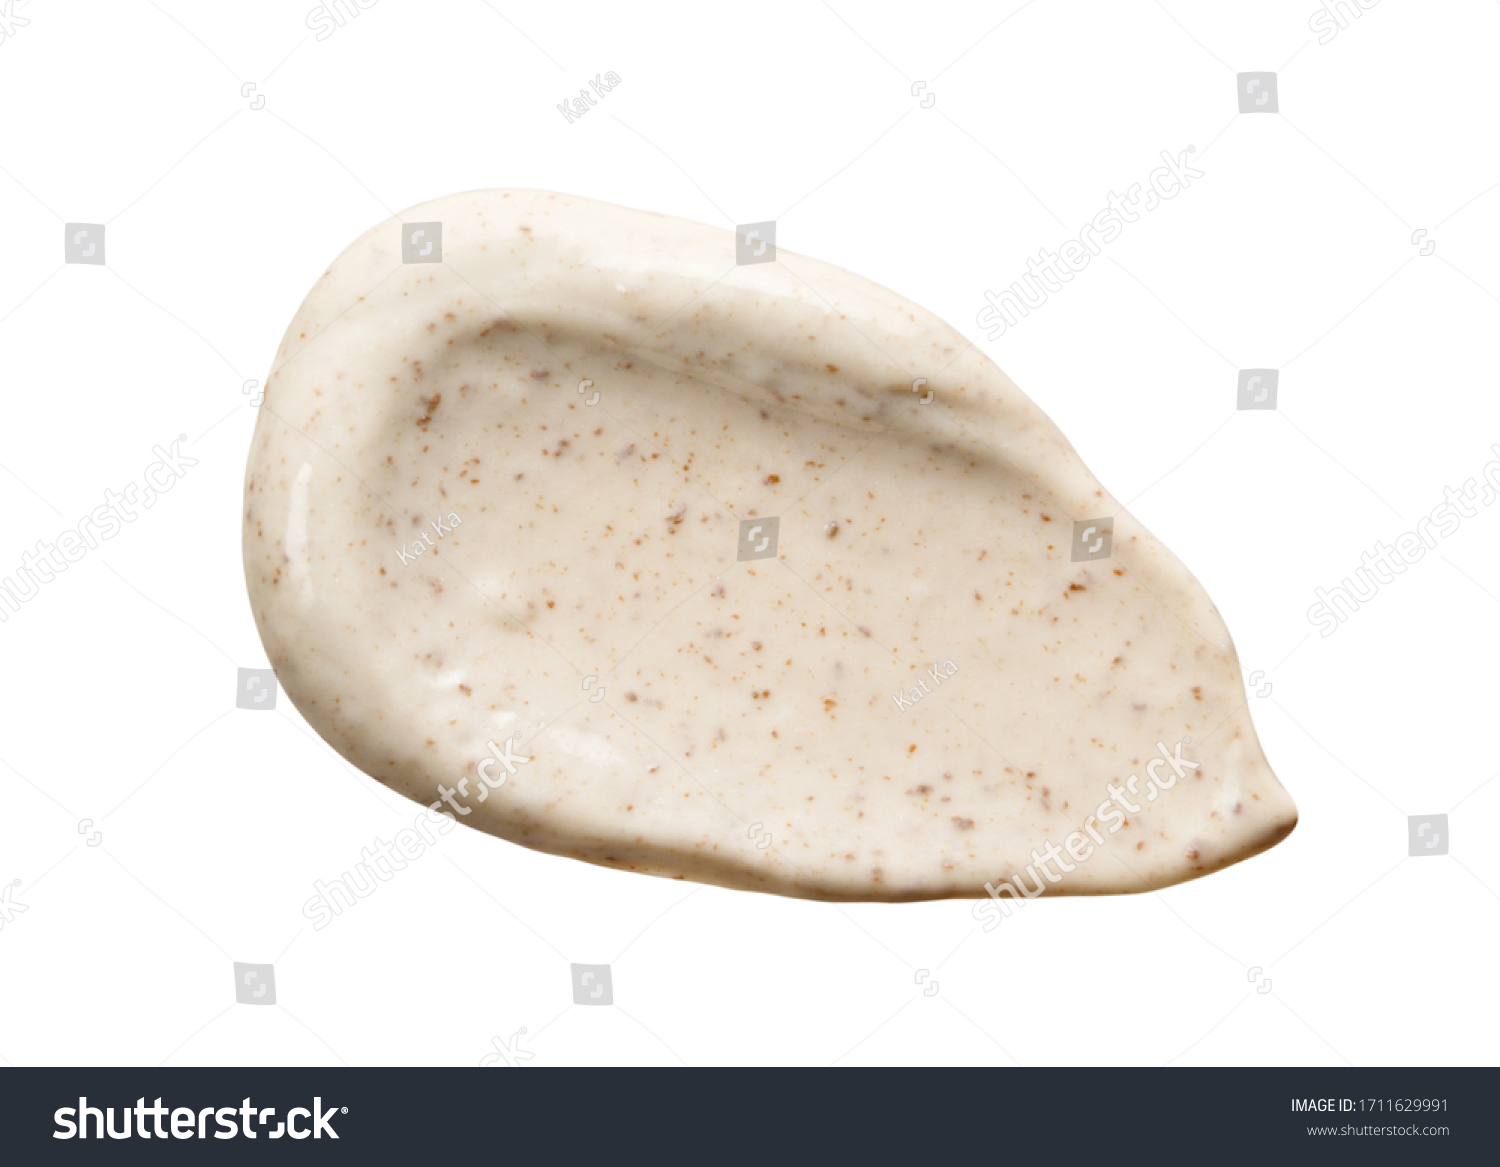 Face cream scrub smear swatch smudge isolated on white. Cosmetic exfoliation product. Beige coffee mask sample close-up #1711629991